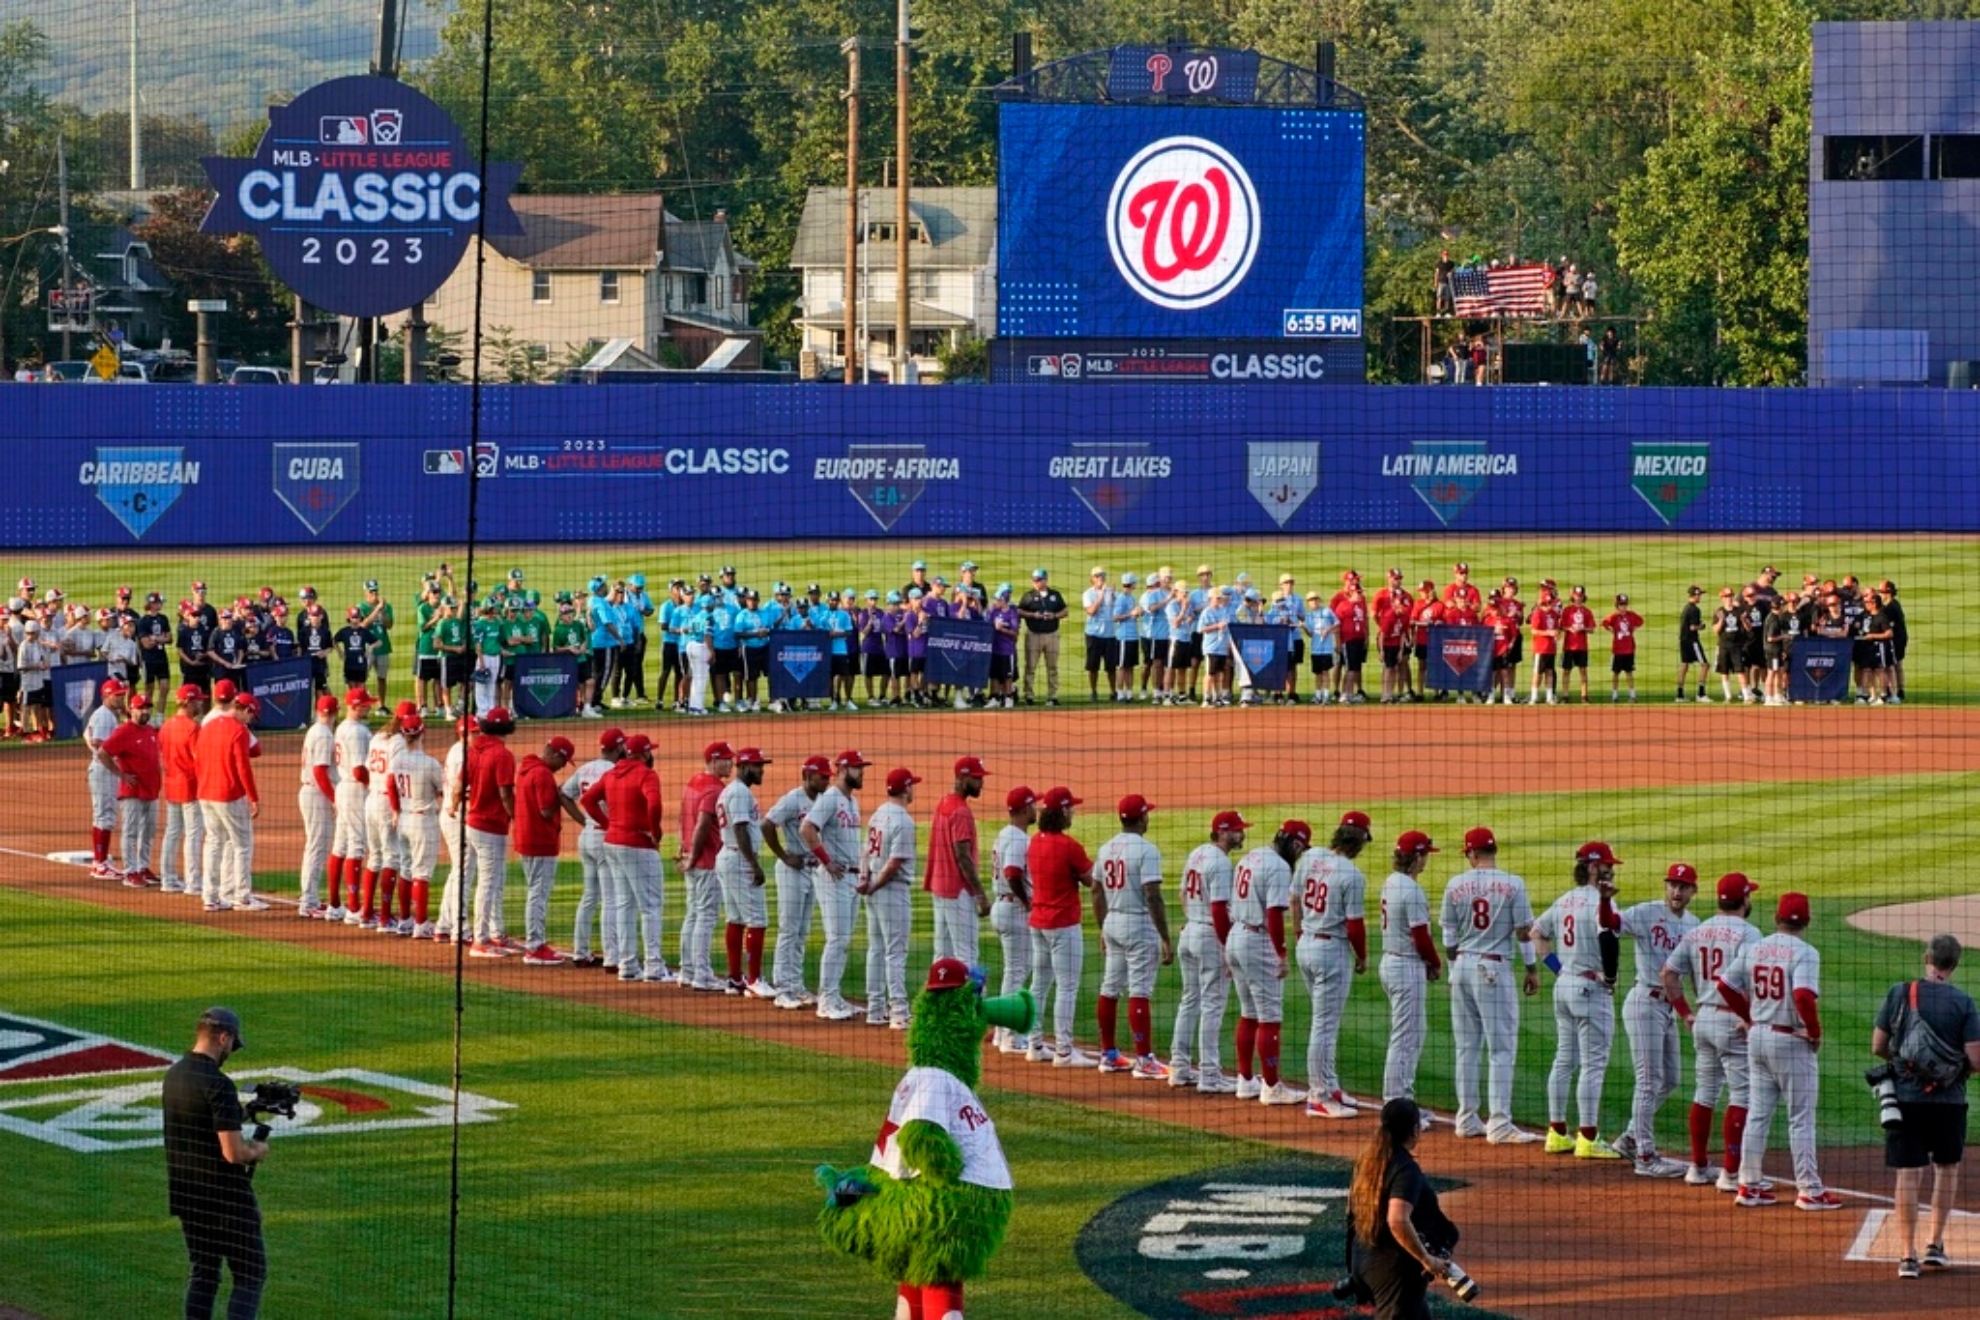 MLB Little League Classic: Phillies fall short, even with 9th inning rally, Nationals take the win